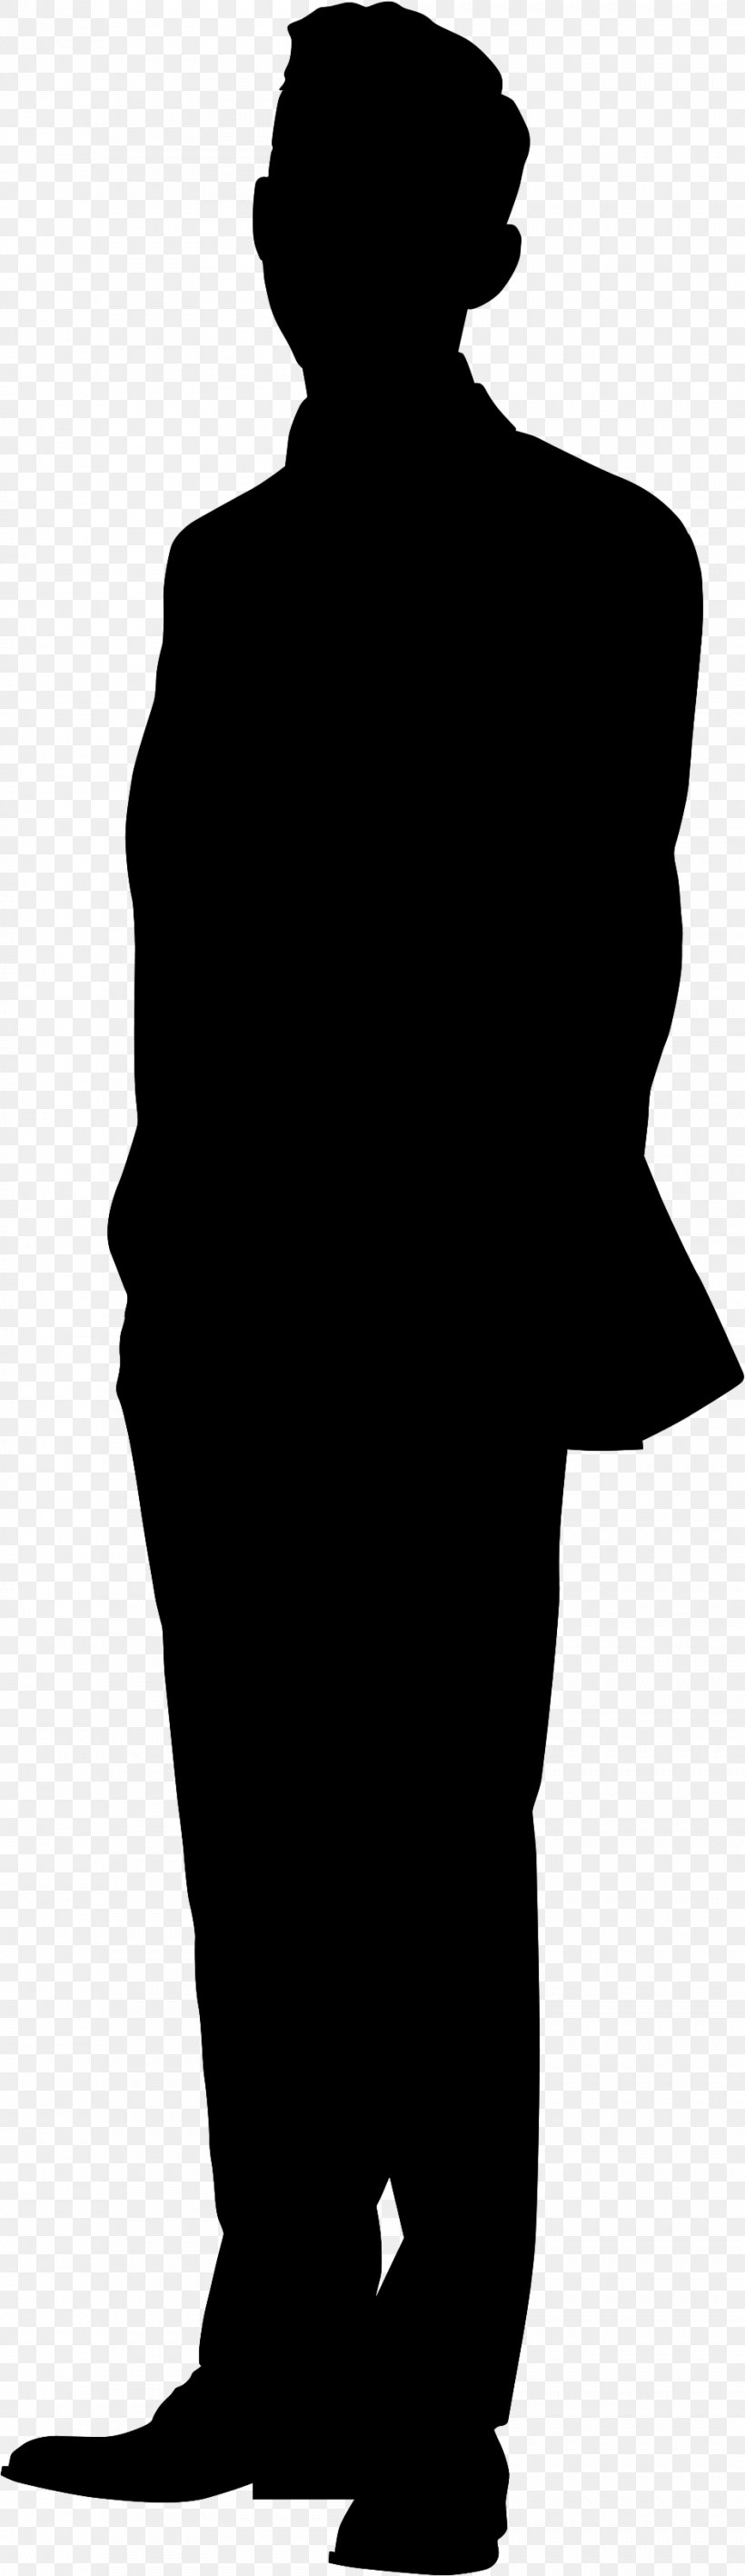 Silhouette Person Playwright, PNG, 943x3260px, Silhouette, Black, Black ...